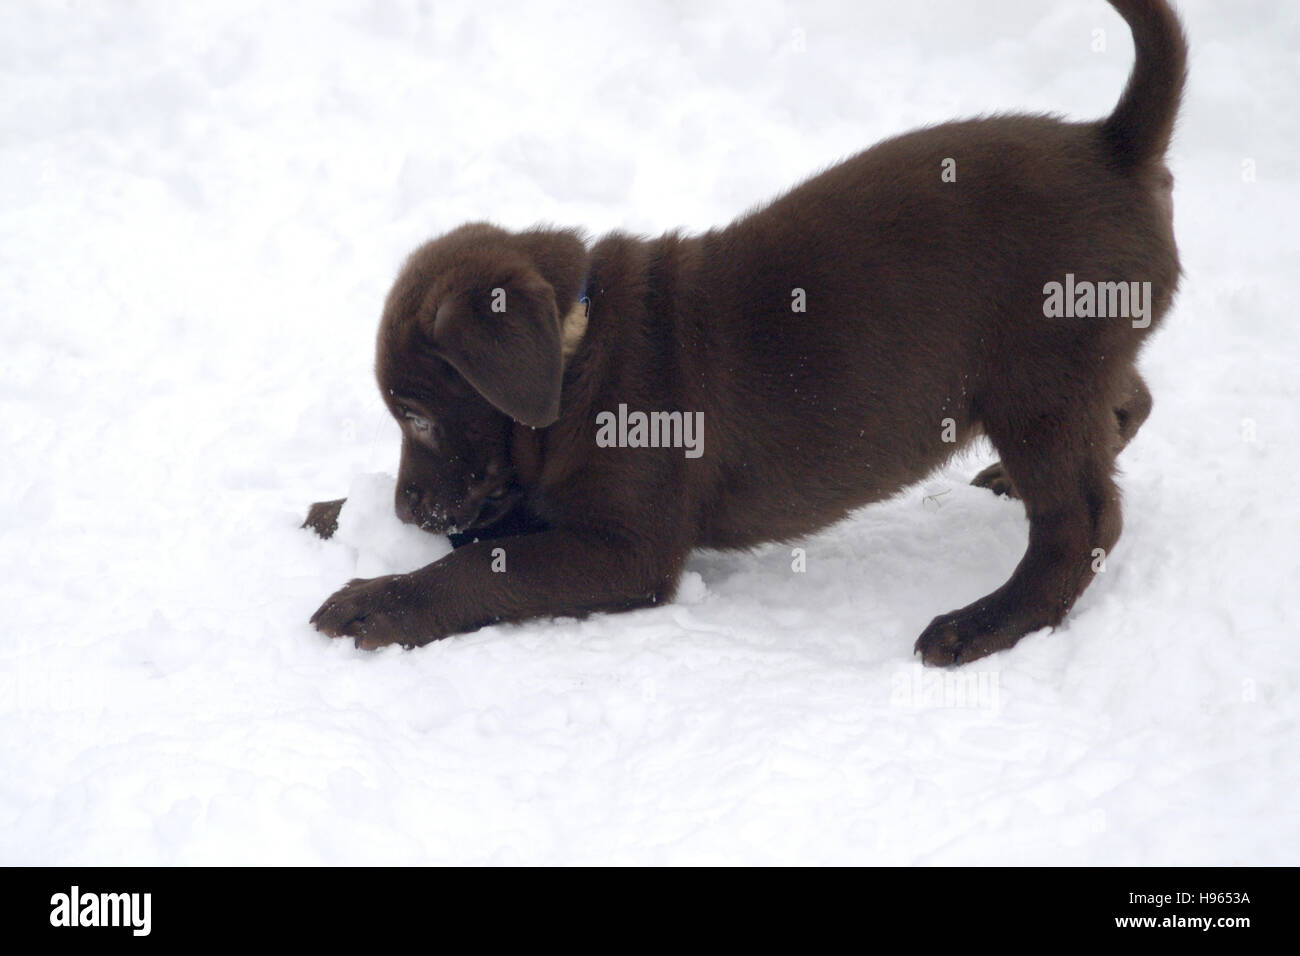 8 week old Chocolate Labrador Retriever puppy playing in snow Stock Photo